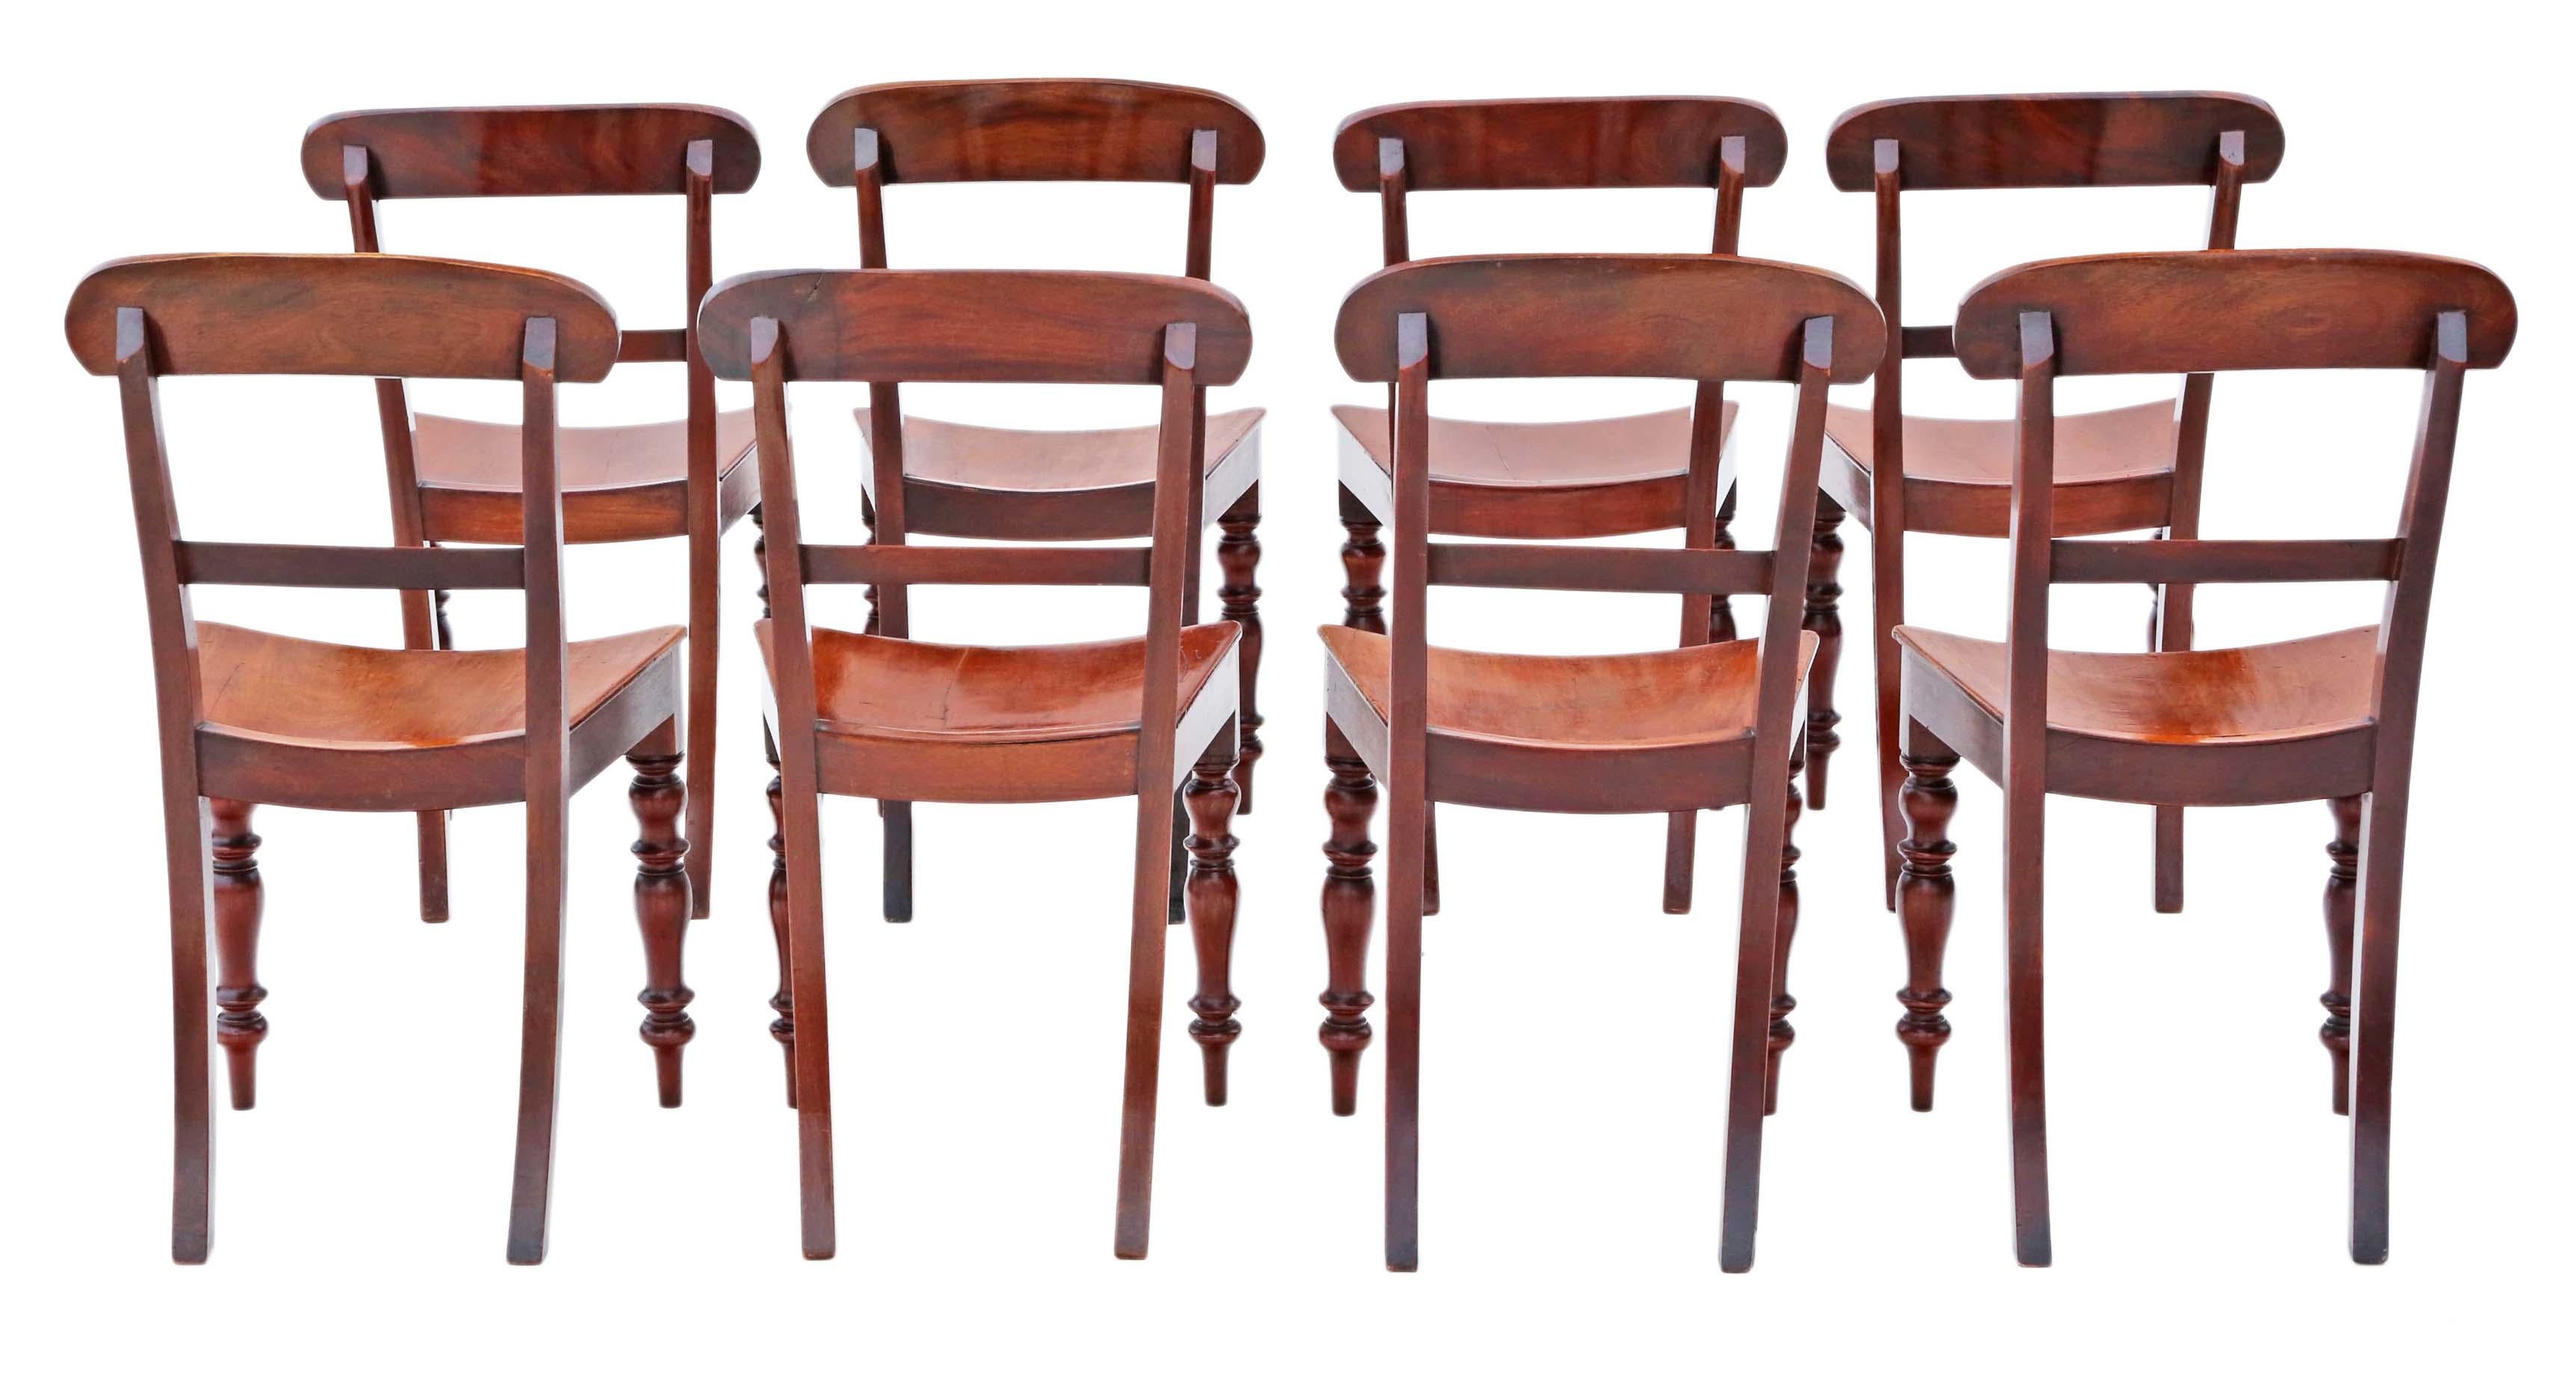 Antique fine quality matched set of 8 mahogany kitchen or dining chairs 19th Century C1860.

A near identical matched set that are very very close (so close in fact that we didn't notice when we purchased them). Possibly, a smaller set that had